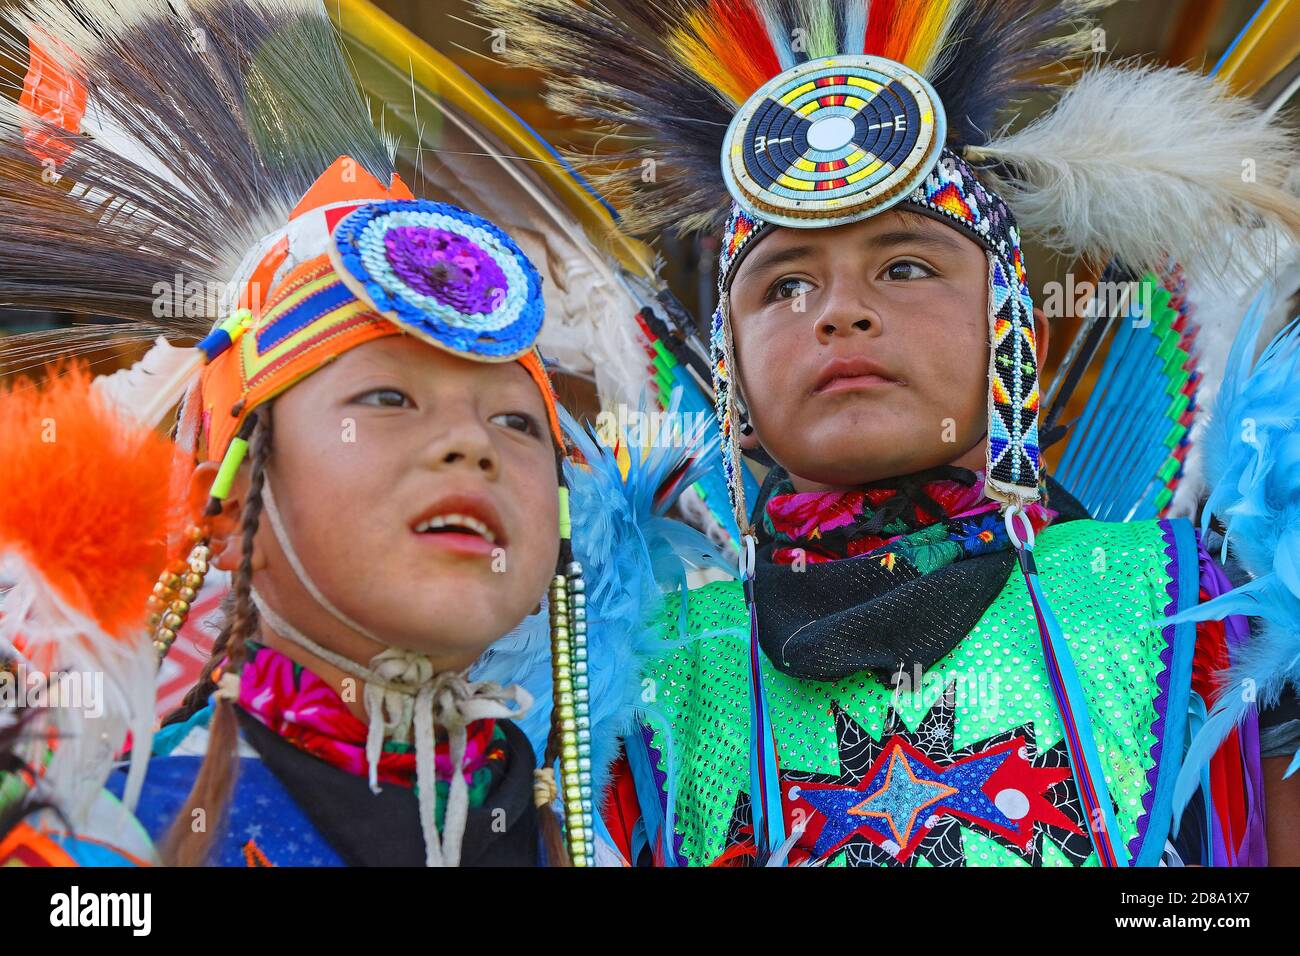 BISMARK, NORTH DAKOTA, September 8, 2018 : Children at 49th annual United Tribes Pow Wow, one large outdoor event that gathers more than 900 dancers a Stock Photo